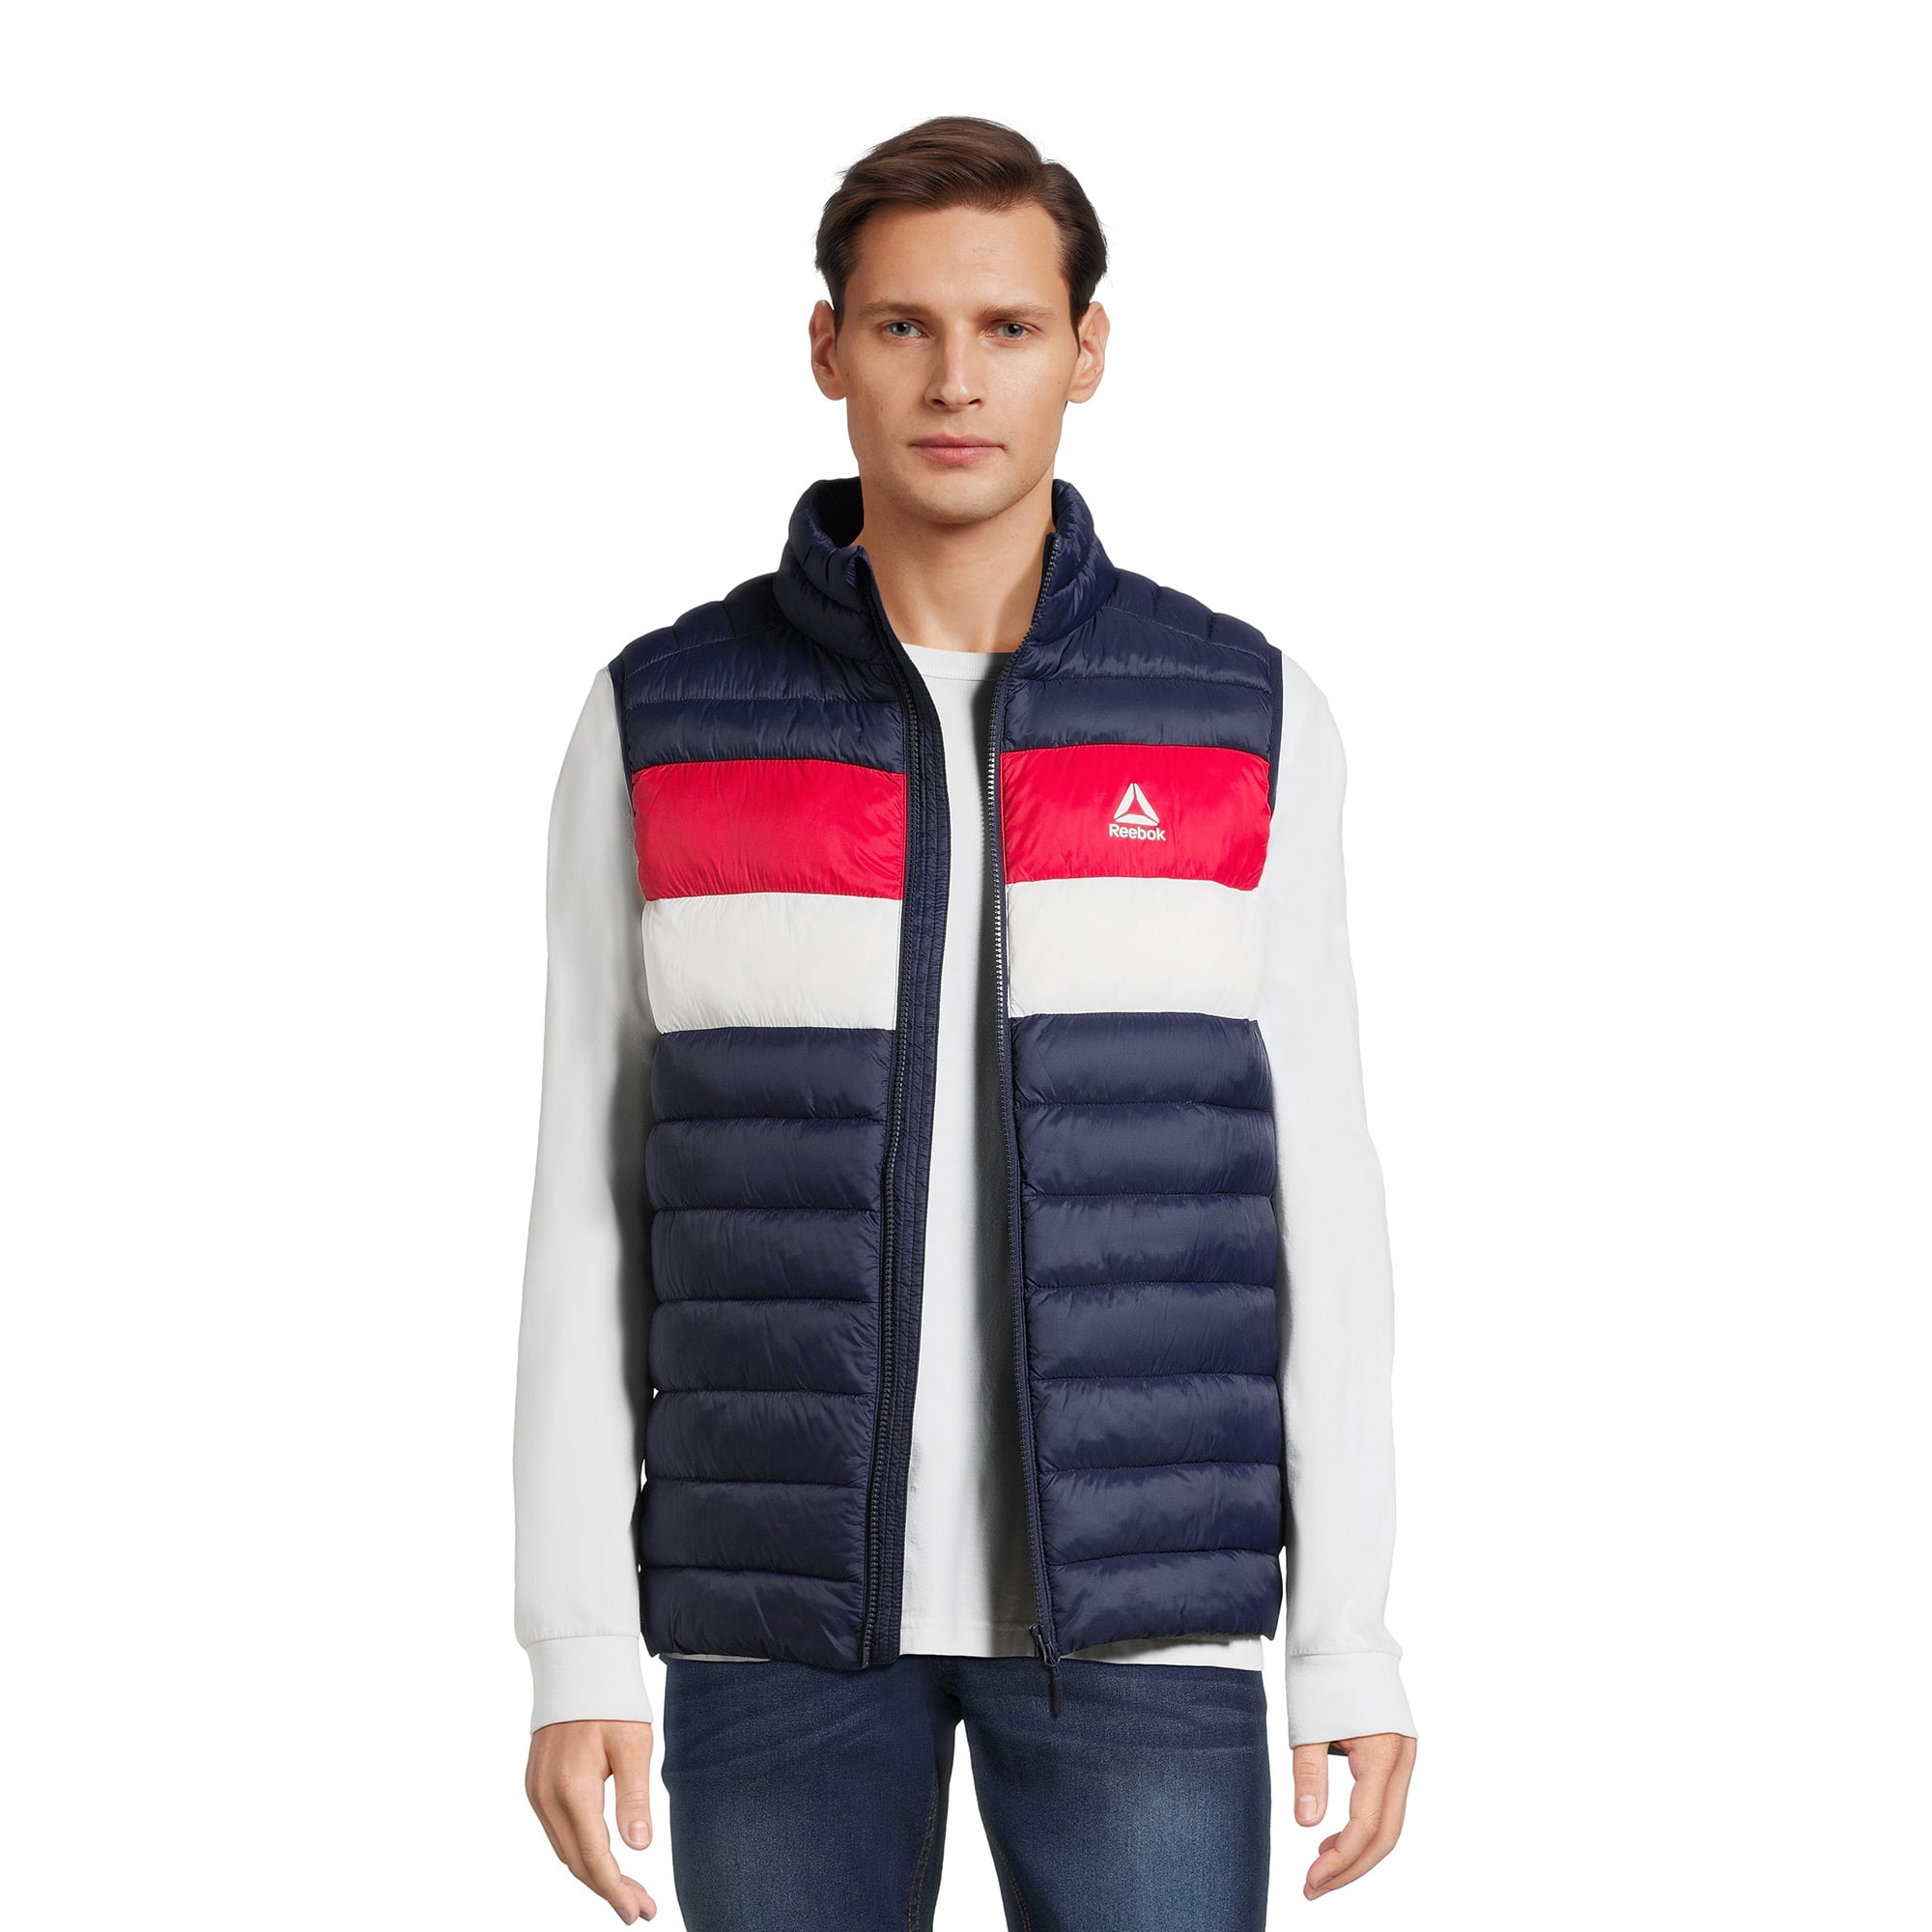 Reebok Men's Lightweight Puffer Vest (Various) from $16.97 + Free Shipping w/ Walmart+ or on $35+